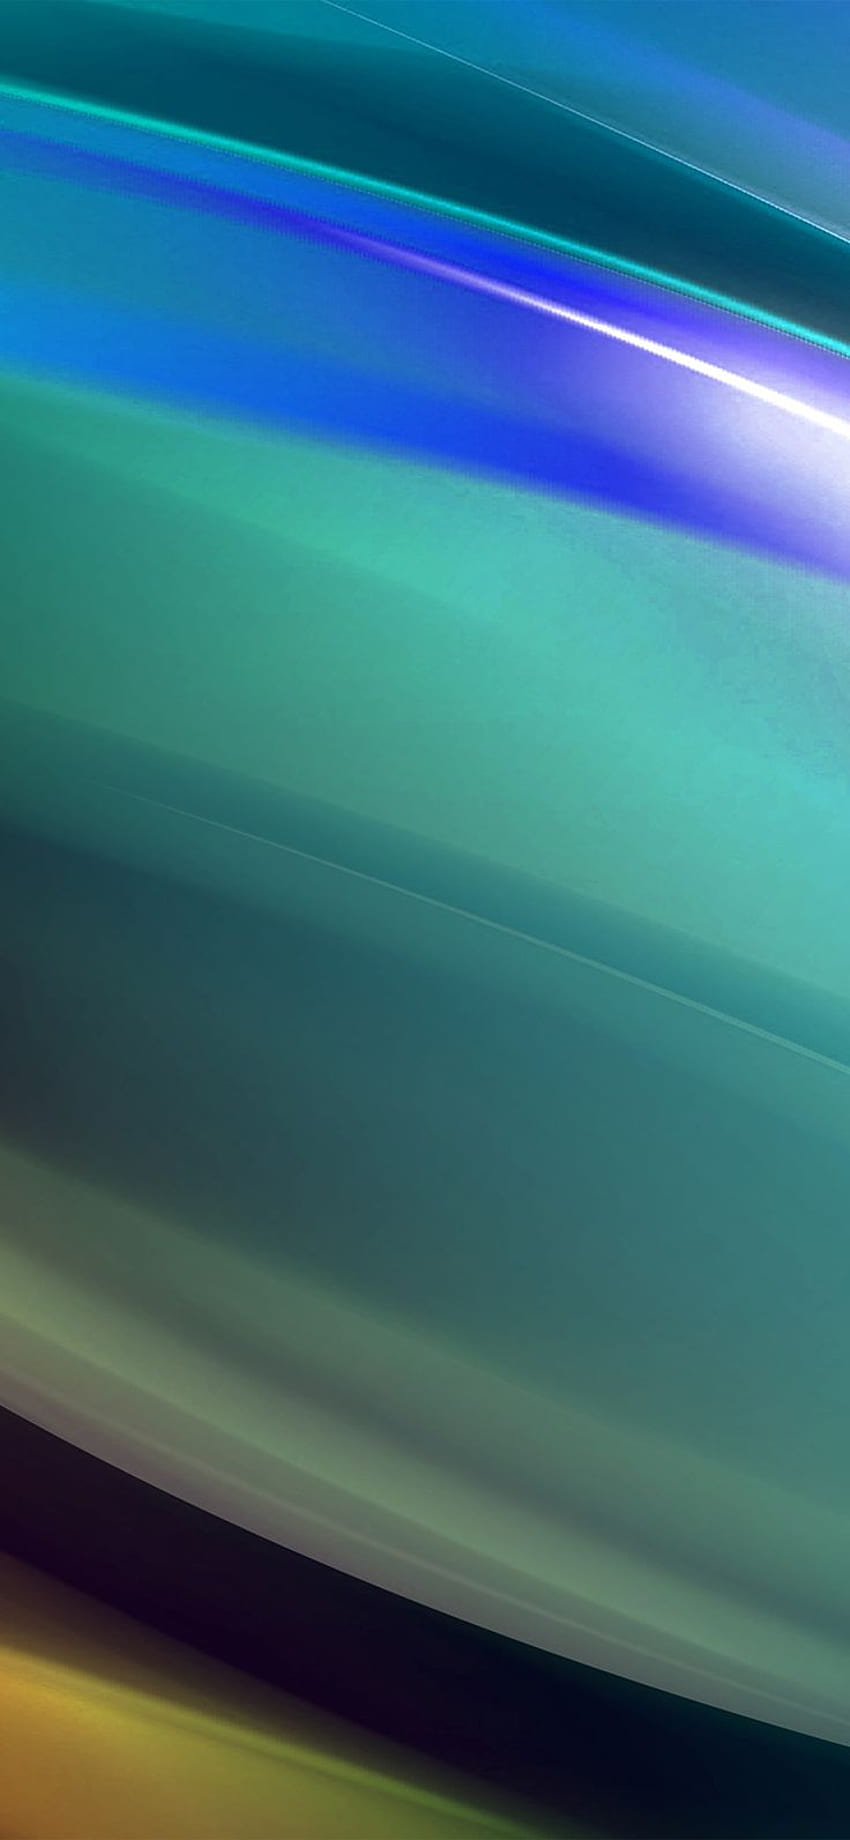 iPhone X - Teal Turquoise Abstract Curve HD phone wallpaper